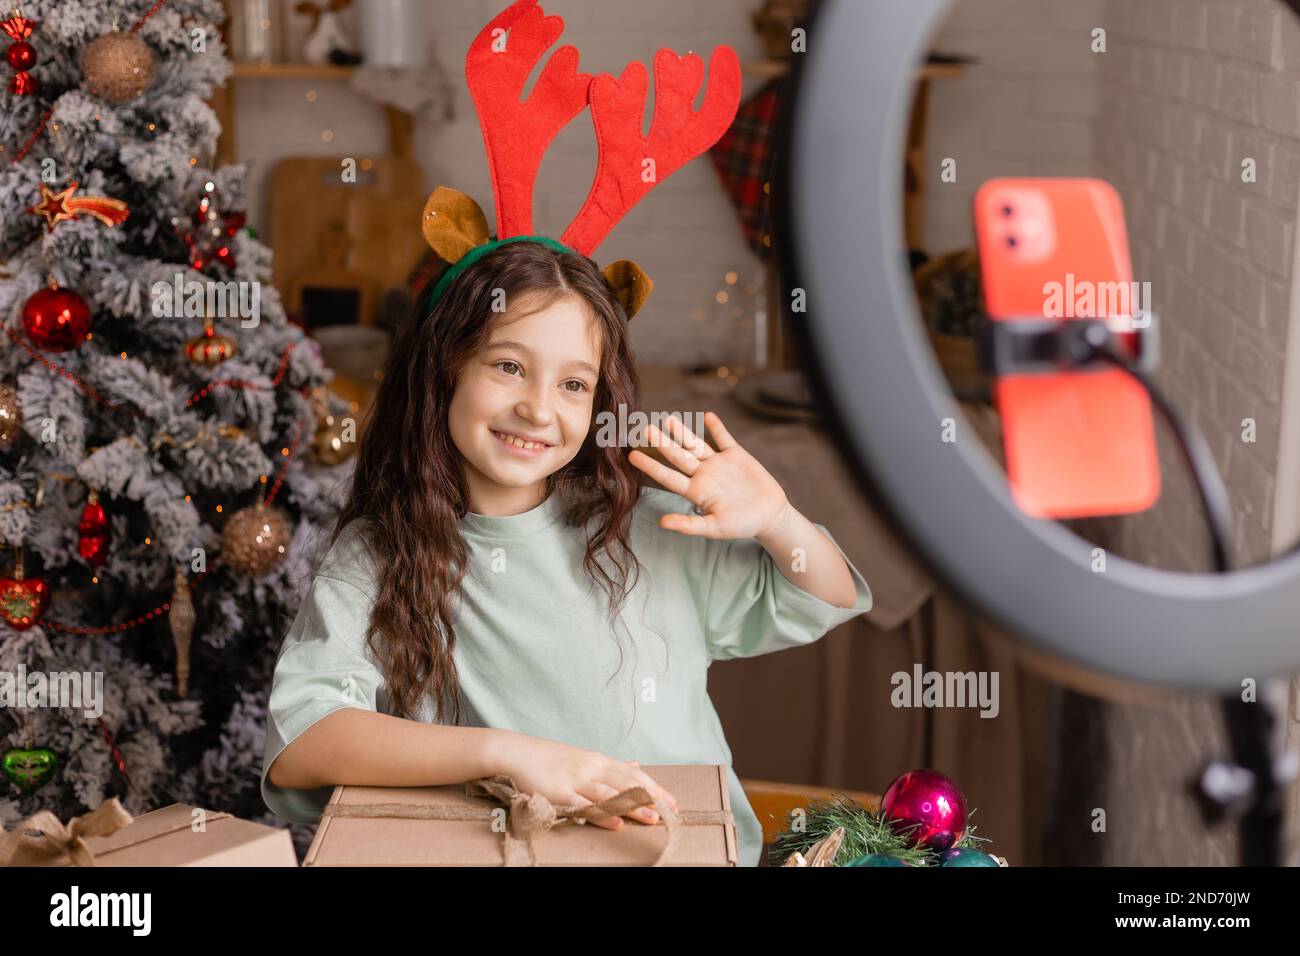 girl in reindeer horns conducts a Christmas live broadcast for social networks via a smartphone Stock Photo